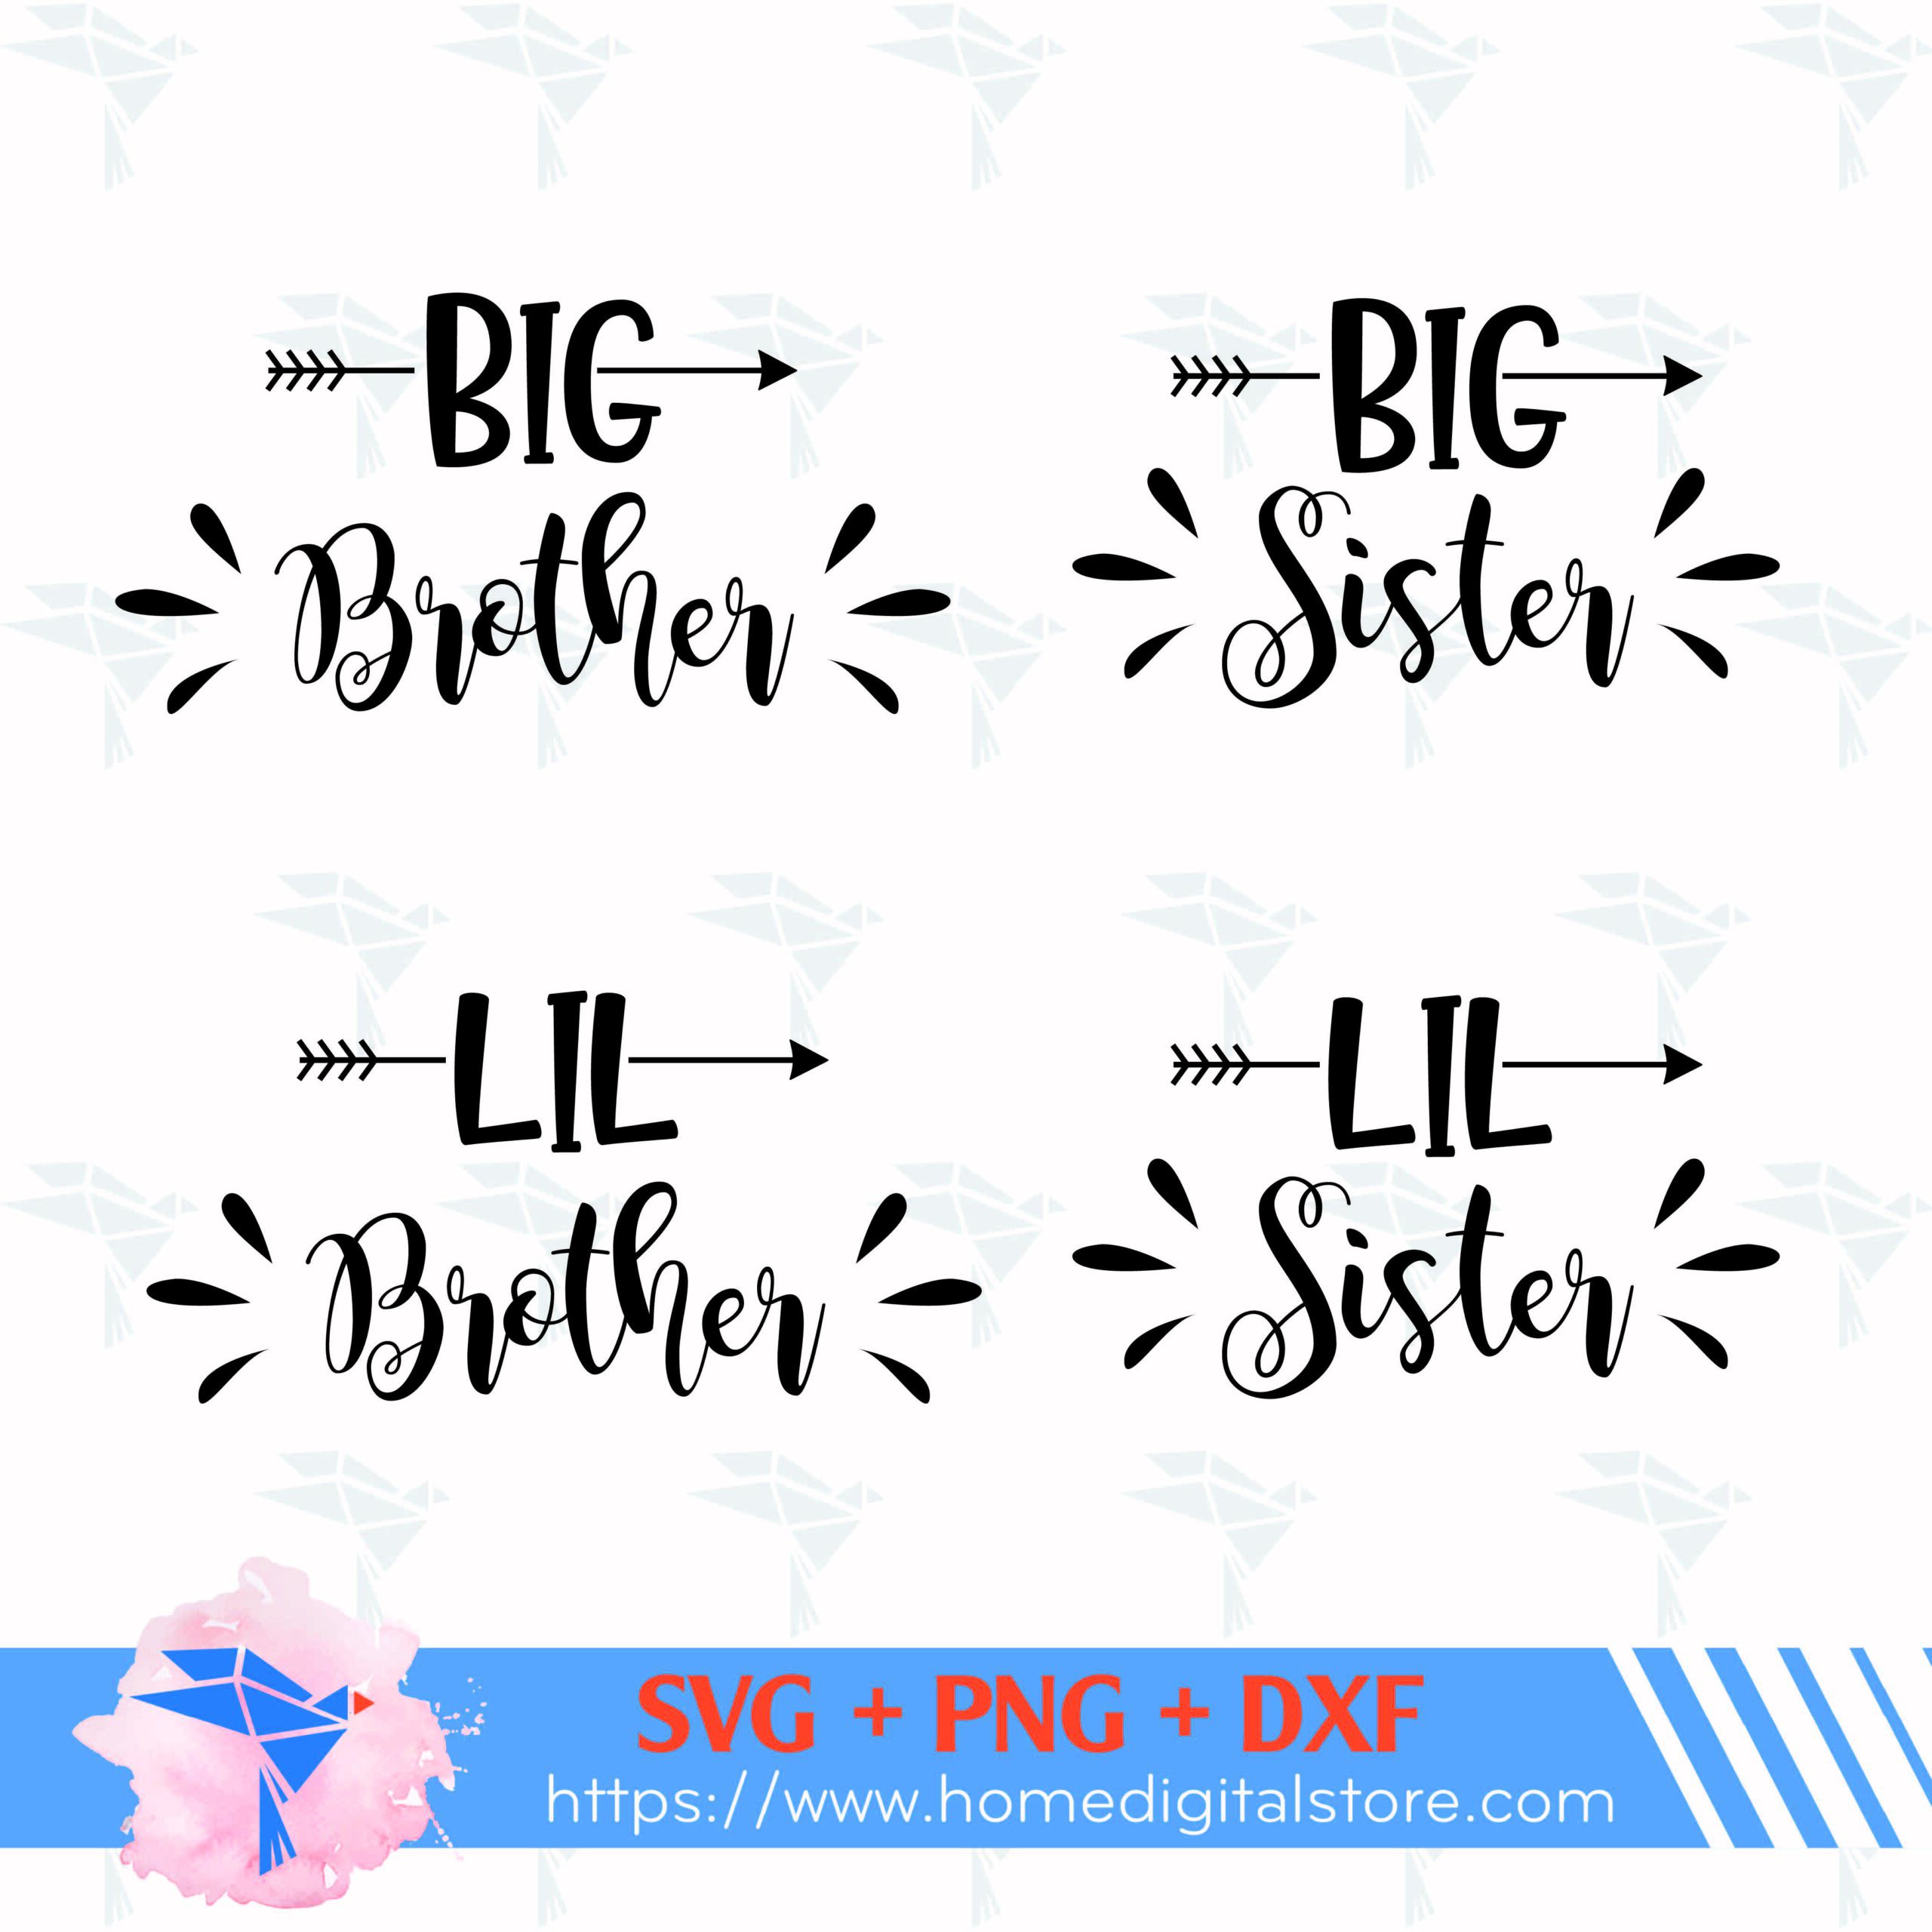 Cutting or more Brother of the Birthday Boy digital clipart files for Design dxf Instant files included svg Printing png